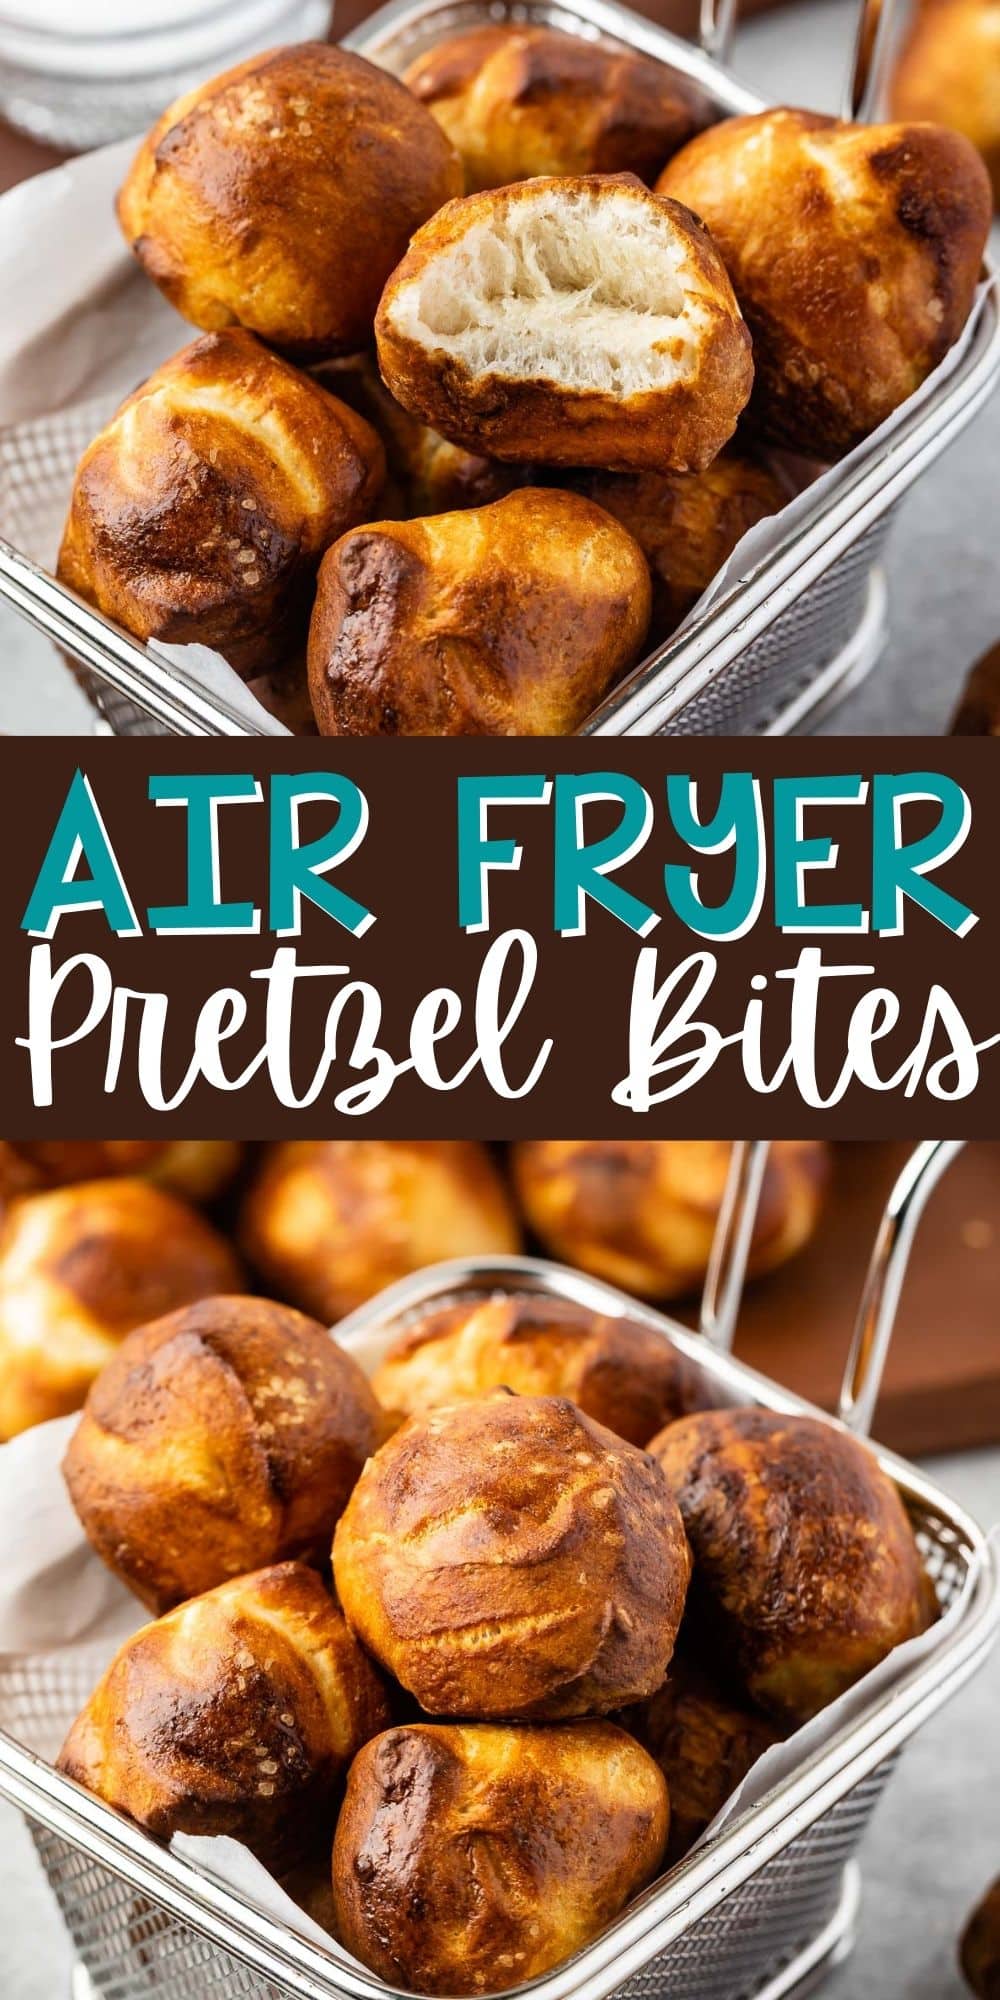 two photos of pretzel bites in a metal sifter with words on the image